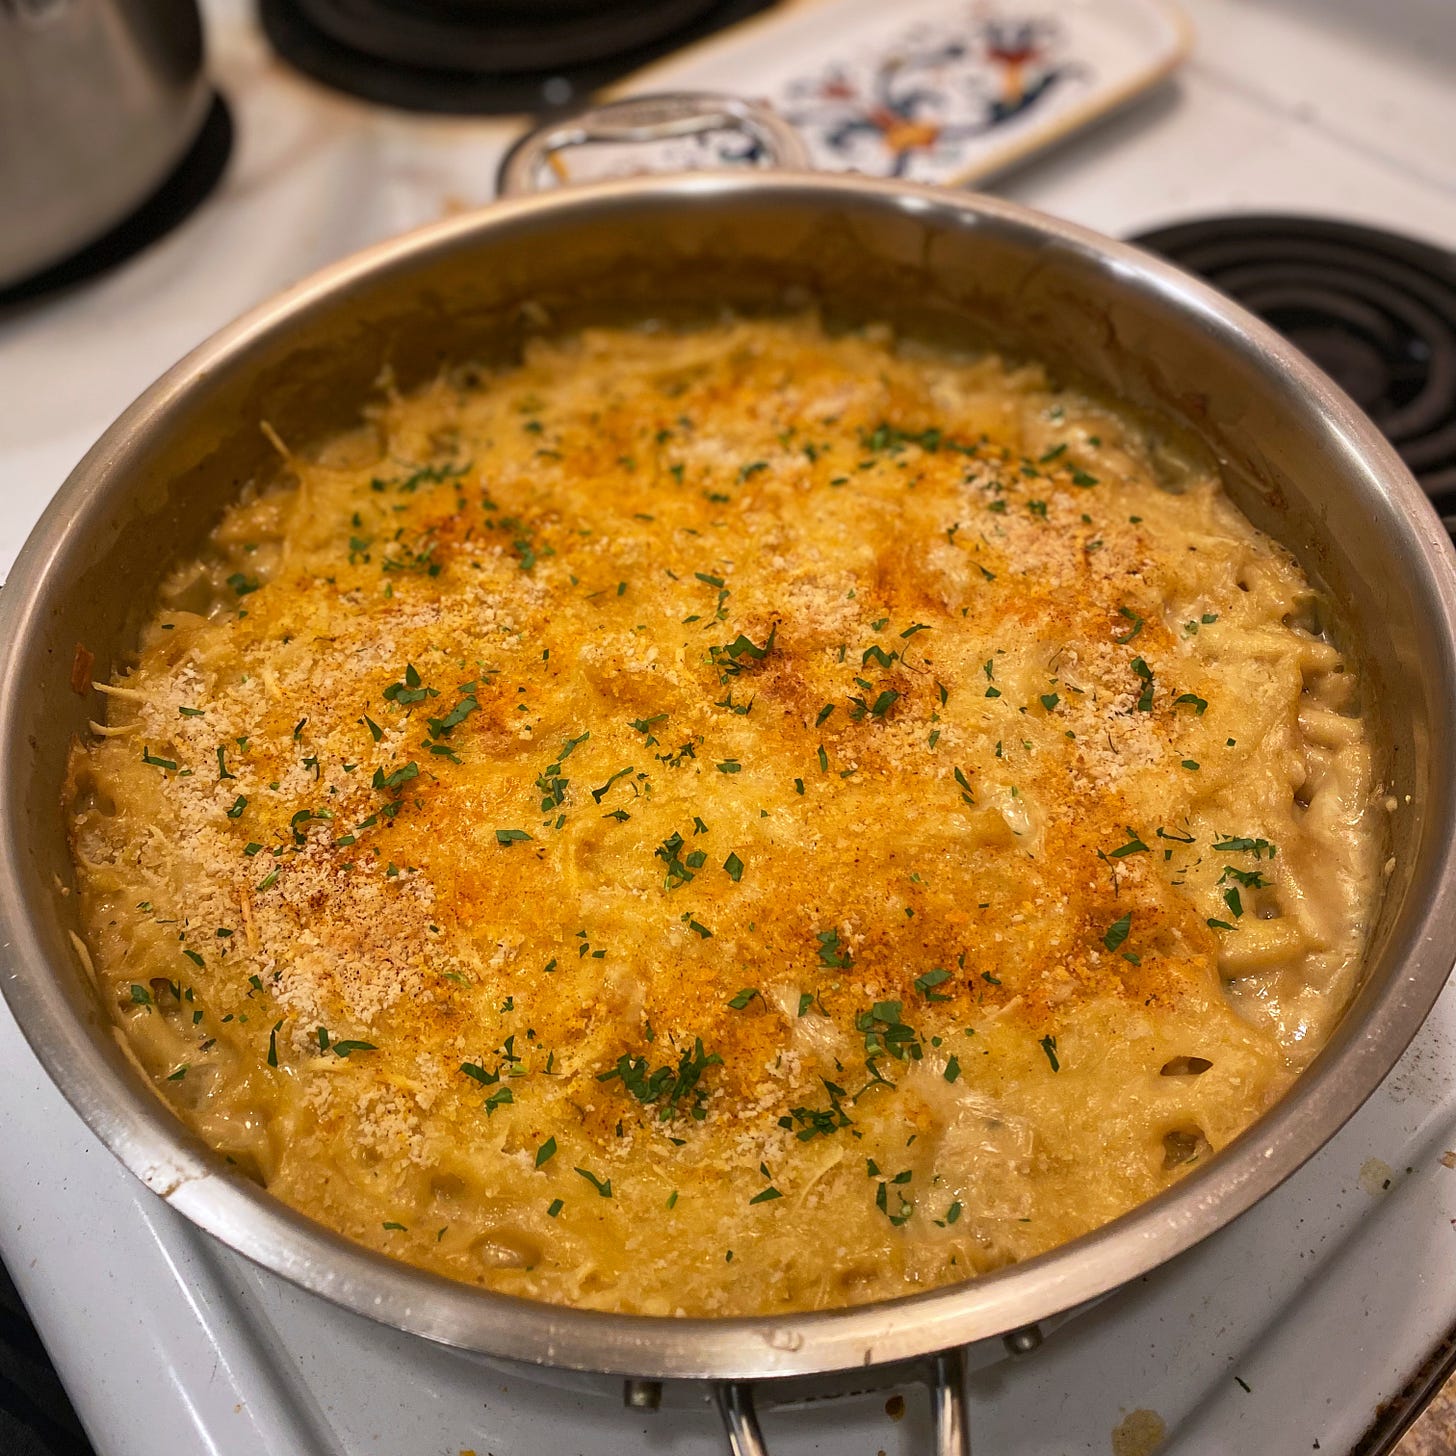 A large stainless steel pan of squash mac & cheese, the top crusted with panko crumbs and browned cheese, sprinkled with parsley.